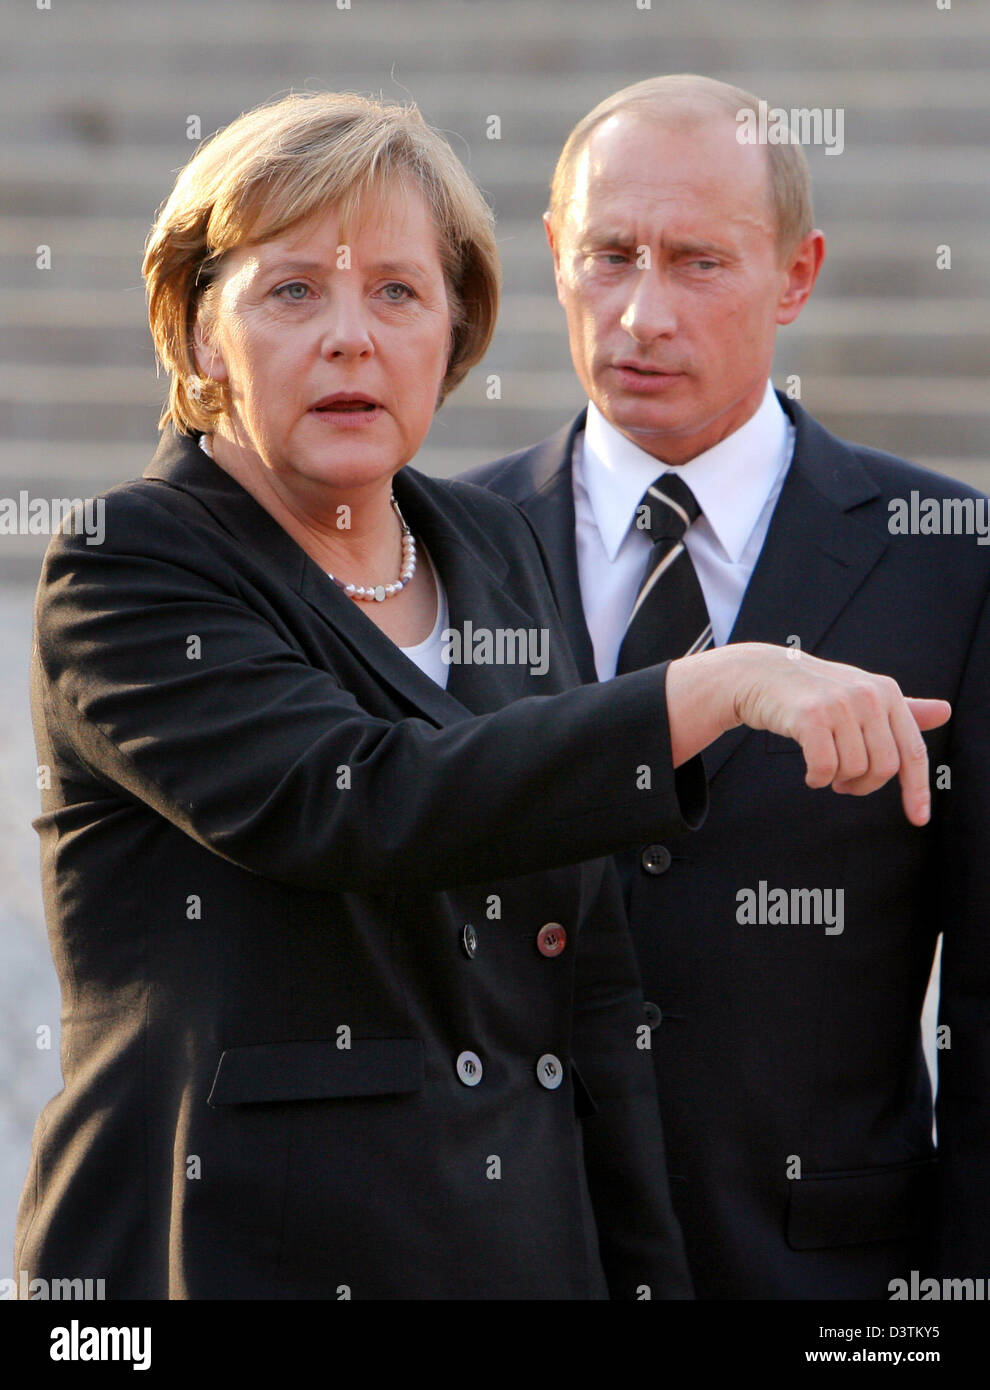 German Chancellor Angela Merkel (L) and Russian President Vladimr Putin (R) walk to the uncovering of a statue of the Russian author Fyodor Dostoevsky (1821 - 1881) on the banks of the river Elbe in Dresden, Germany, Tuesday, 10 October 2006. The statue was designed by Russian sculptor Alexander Rukawischnikow. Photo: Matthias Hiekel Stock Photo